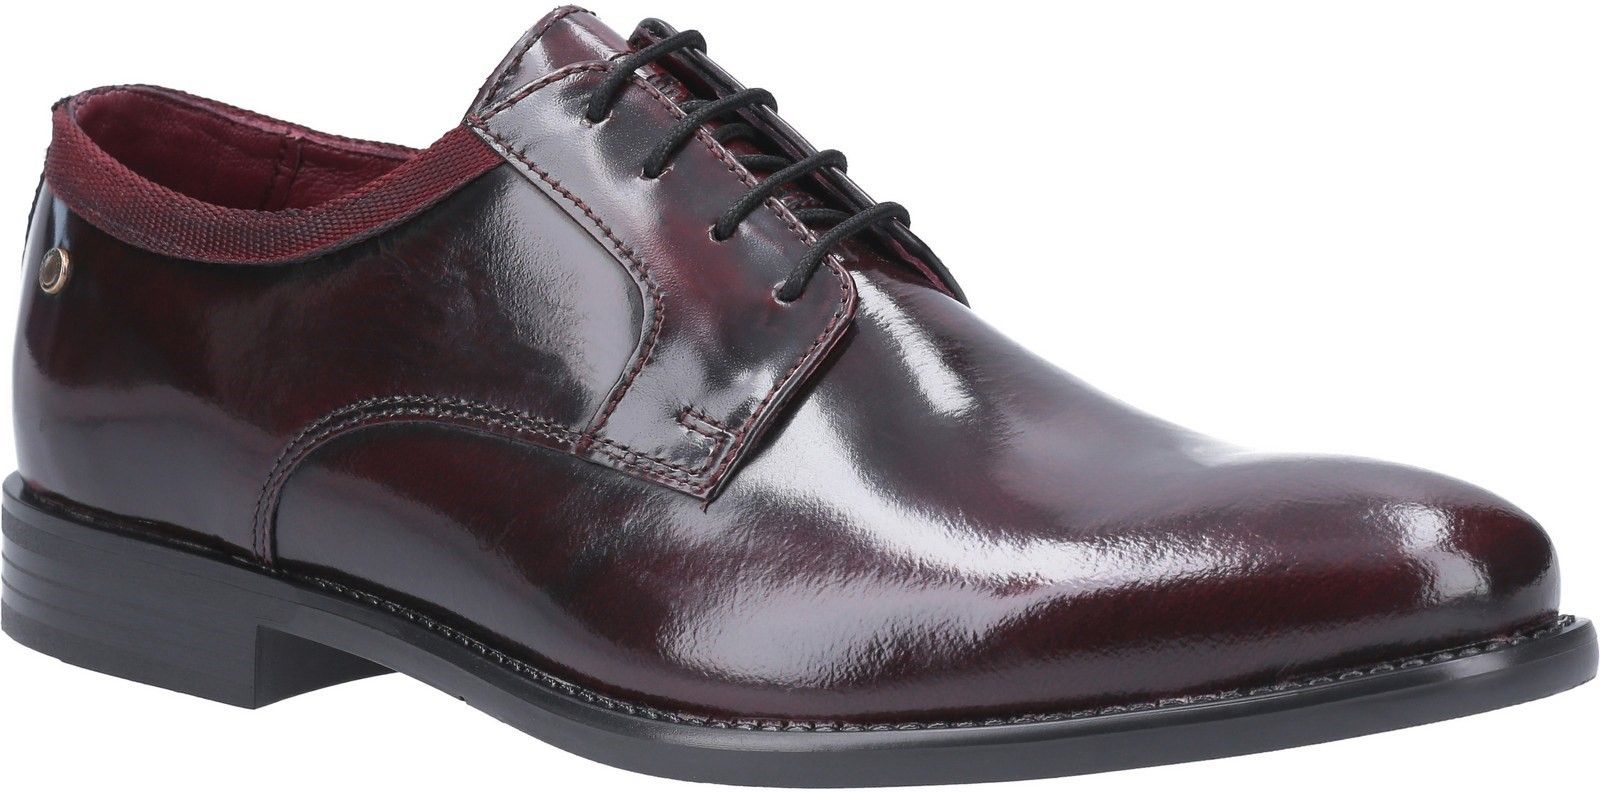 Nero Hi Shine is a crisp statement shoe from our new Base London Vino collection. With its prominent resin outsole, this Nero Oxford shoe offers a nostalgic nod to vintage style, whilst delivering a fashion forward contemporary feel.Derby Shoe. 
Resin Sole.